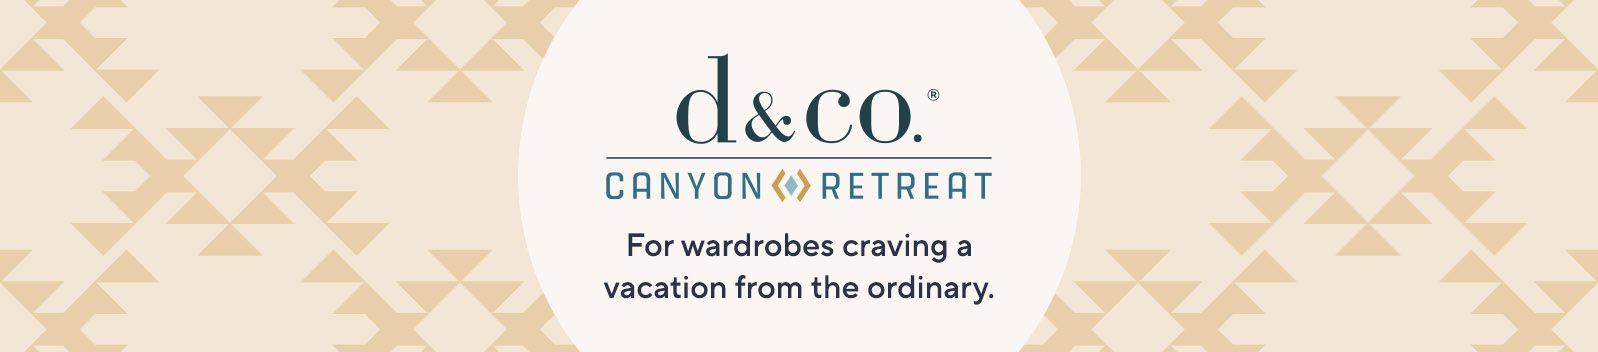 Denim & Co. Canyon Retreat: For wardrobes craving a vacation from the ordinary.